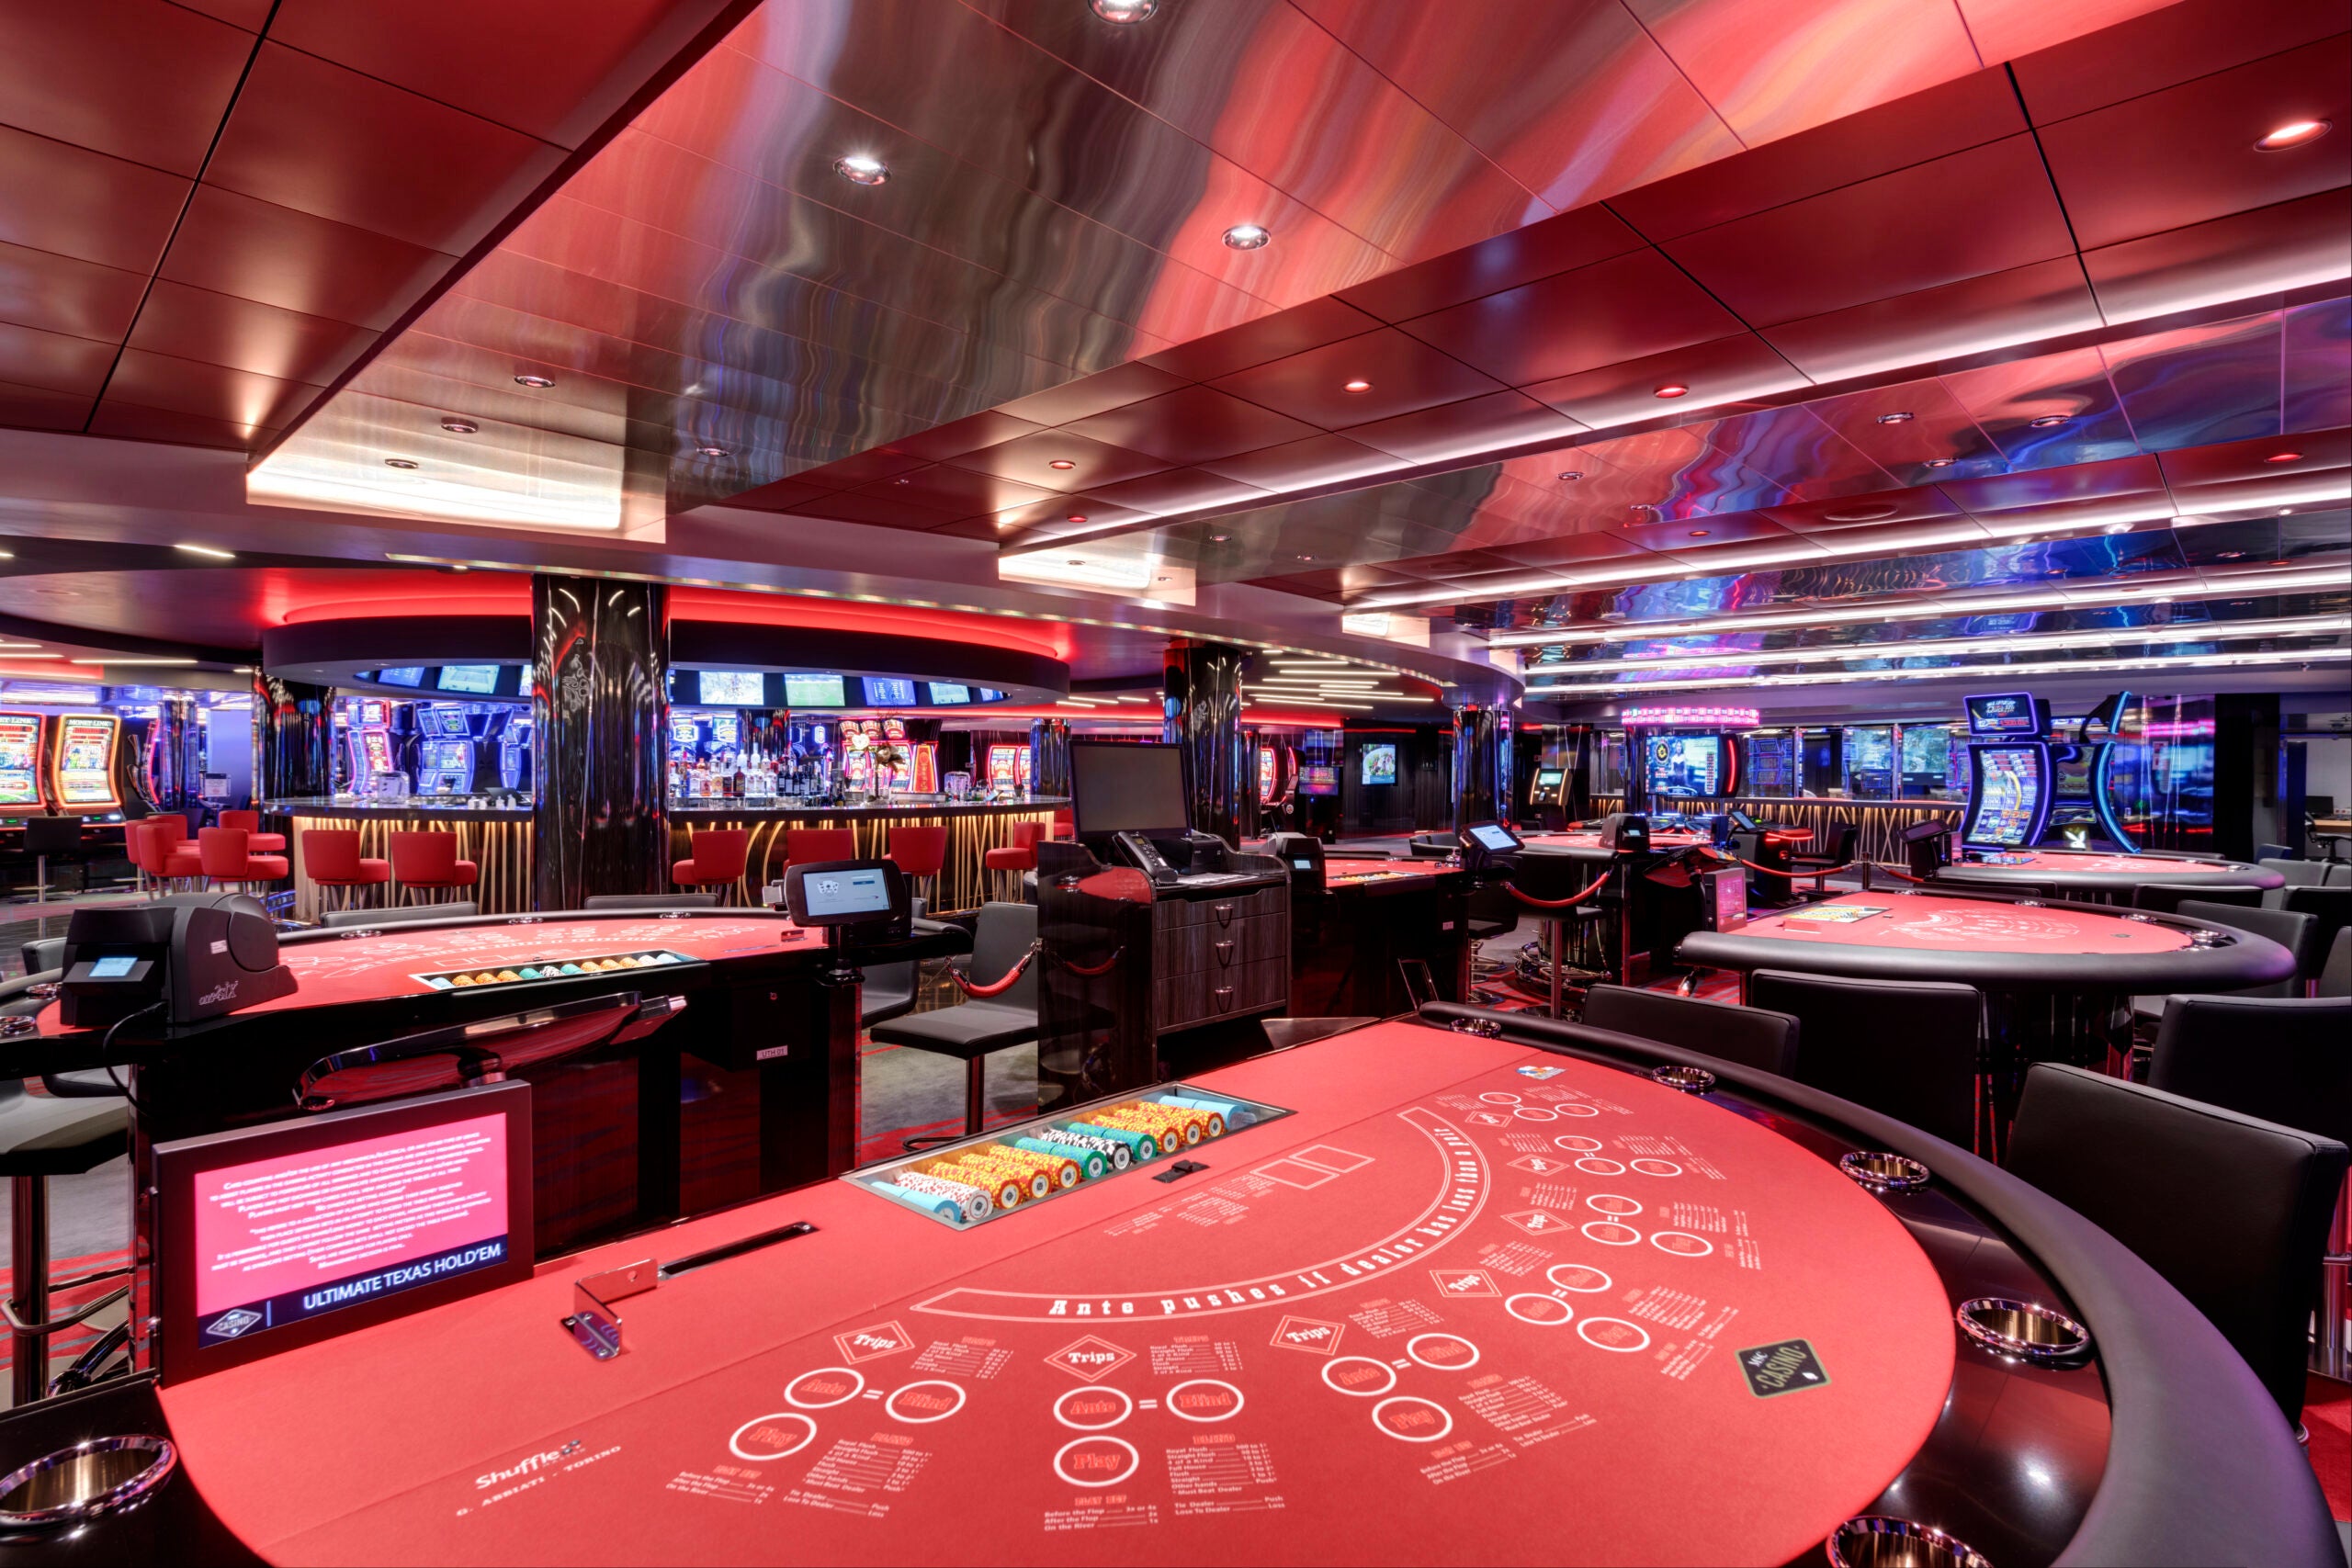 Cruise ship casino with gaming tables.